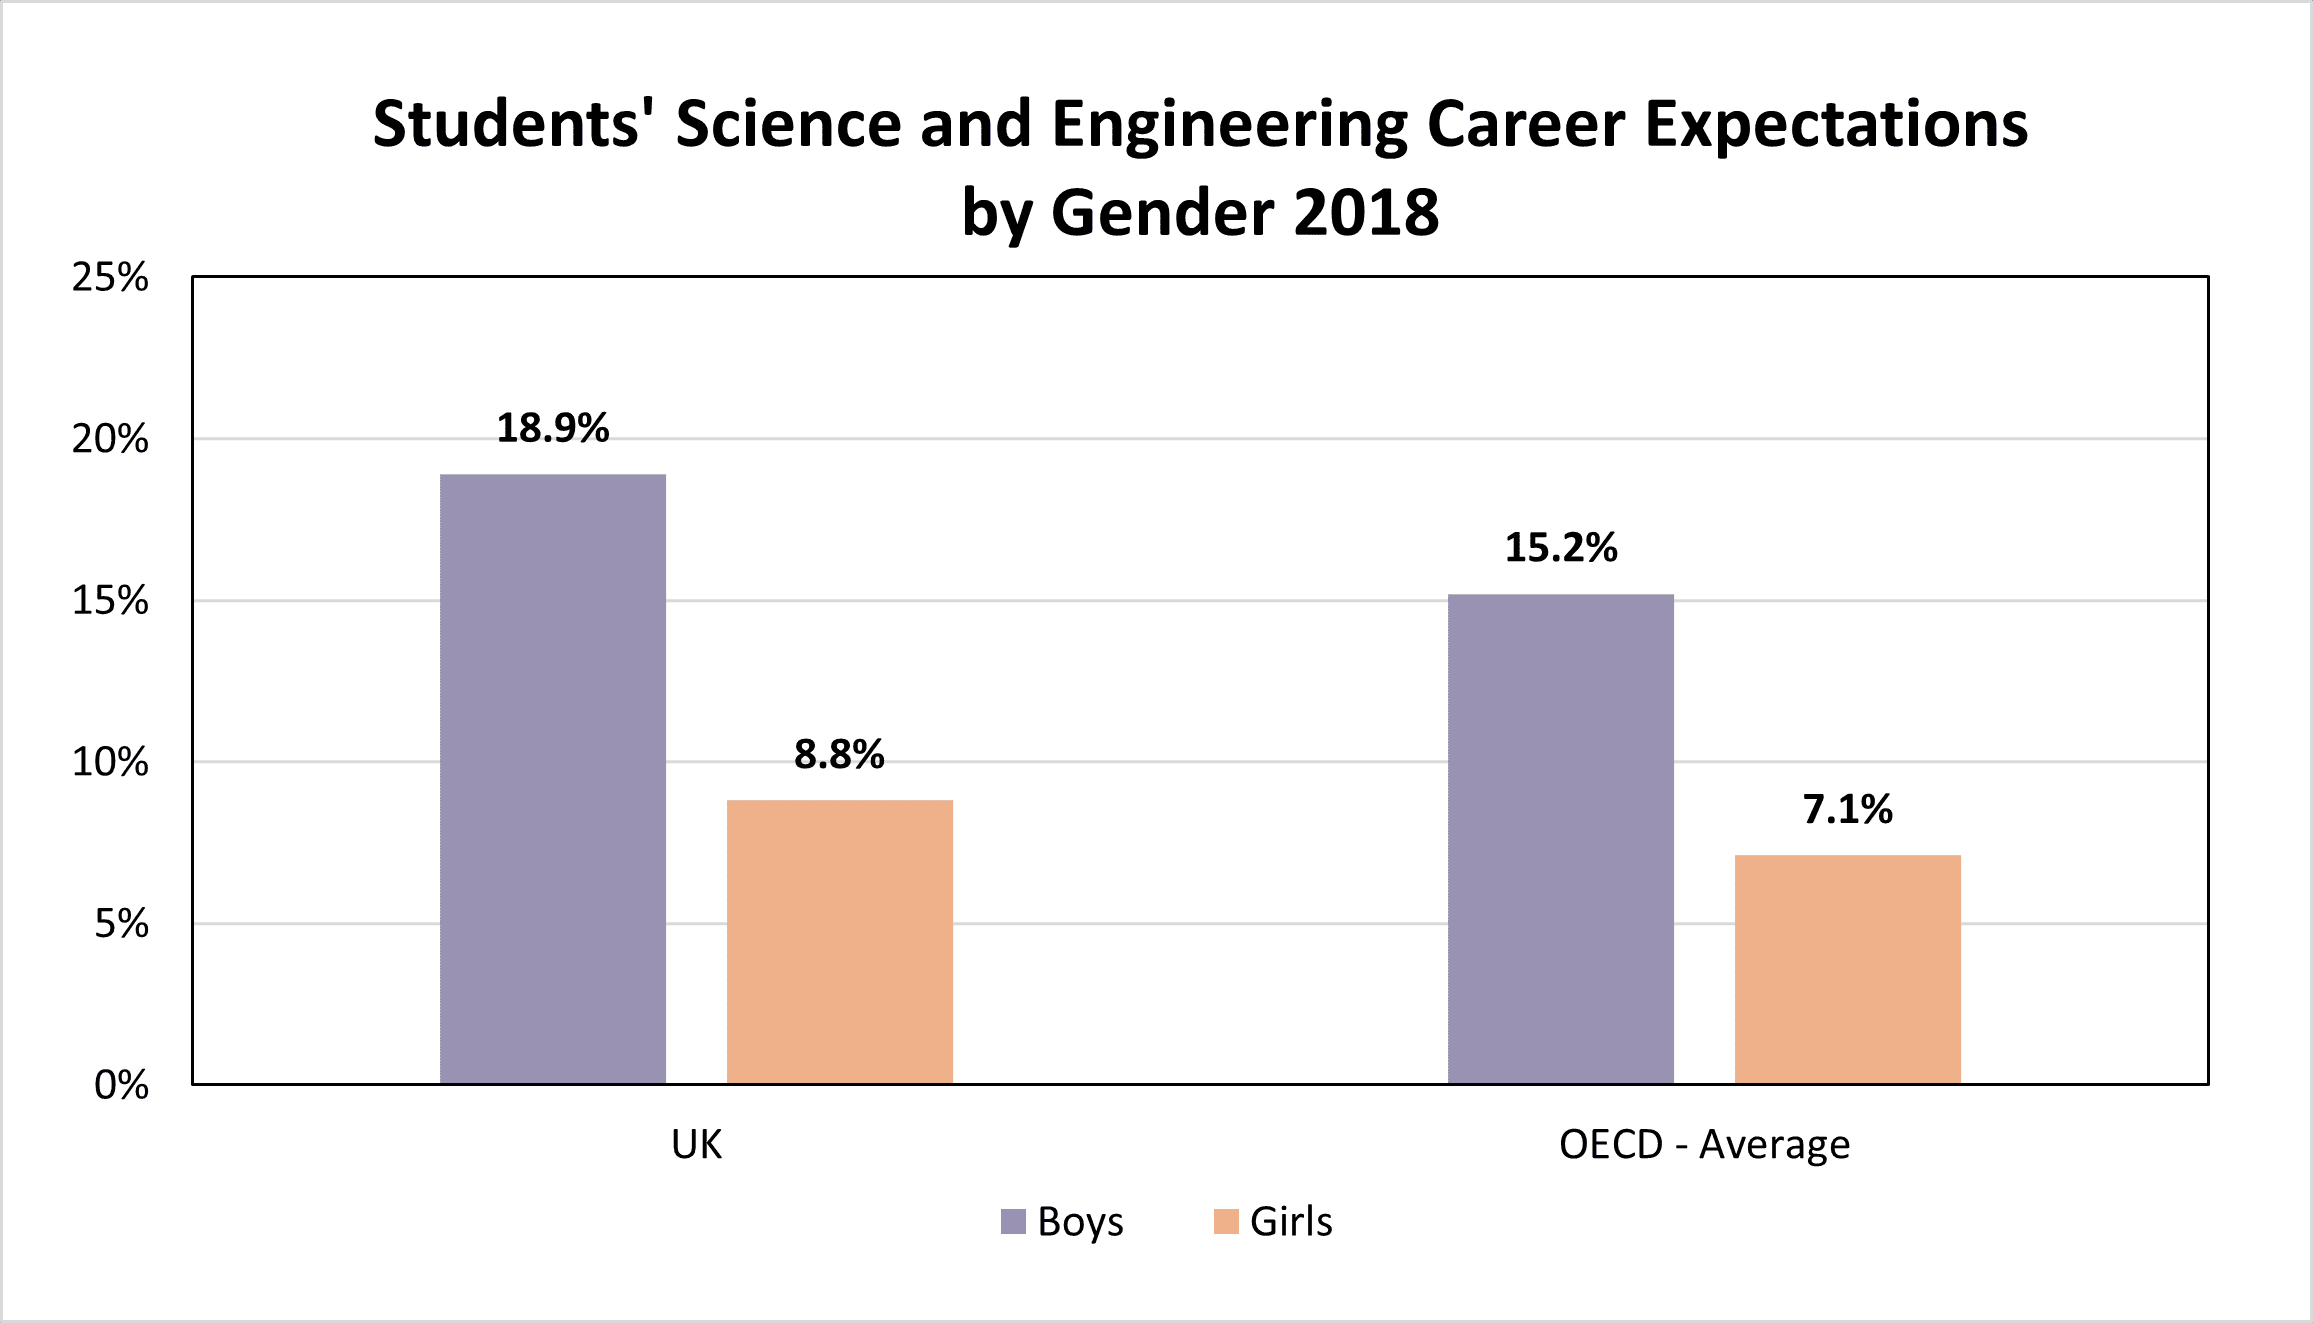 Students' Science and Engineering Career Expectations by Gender 2018